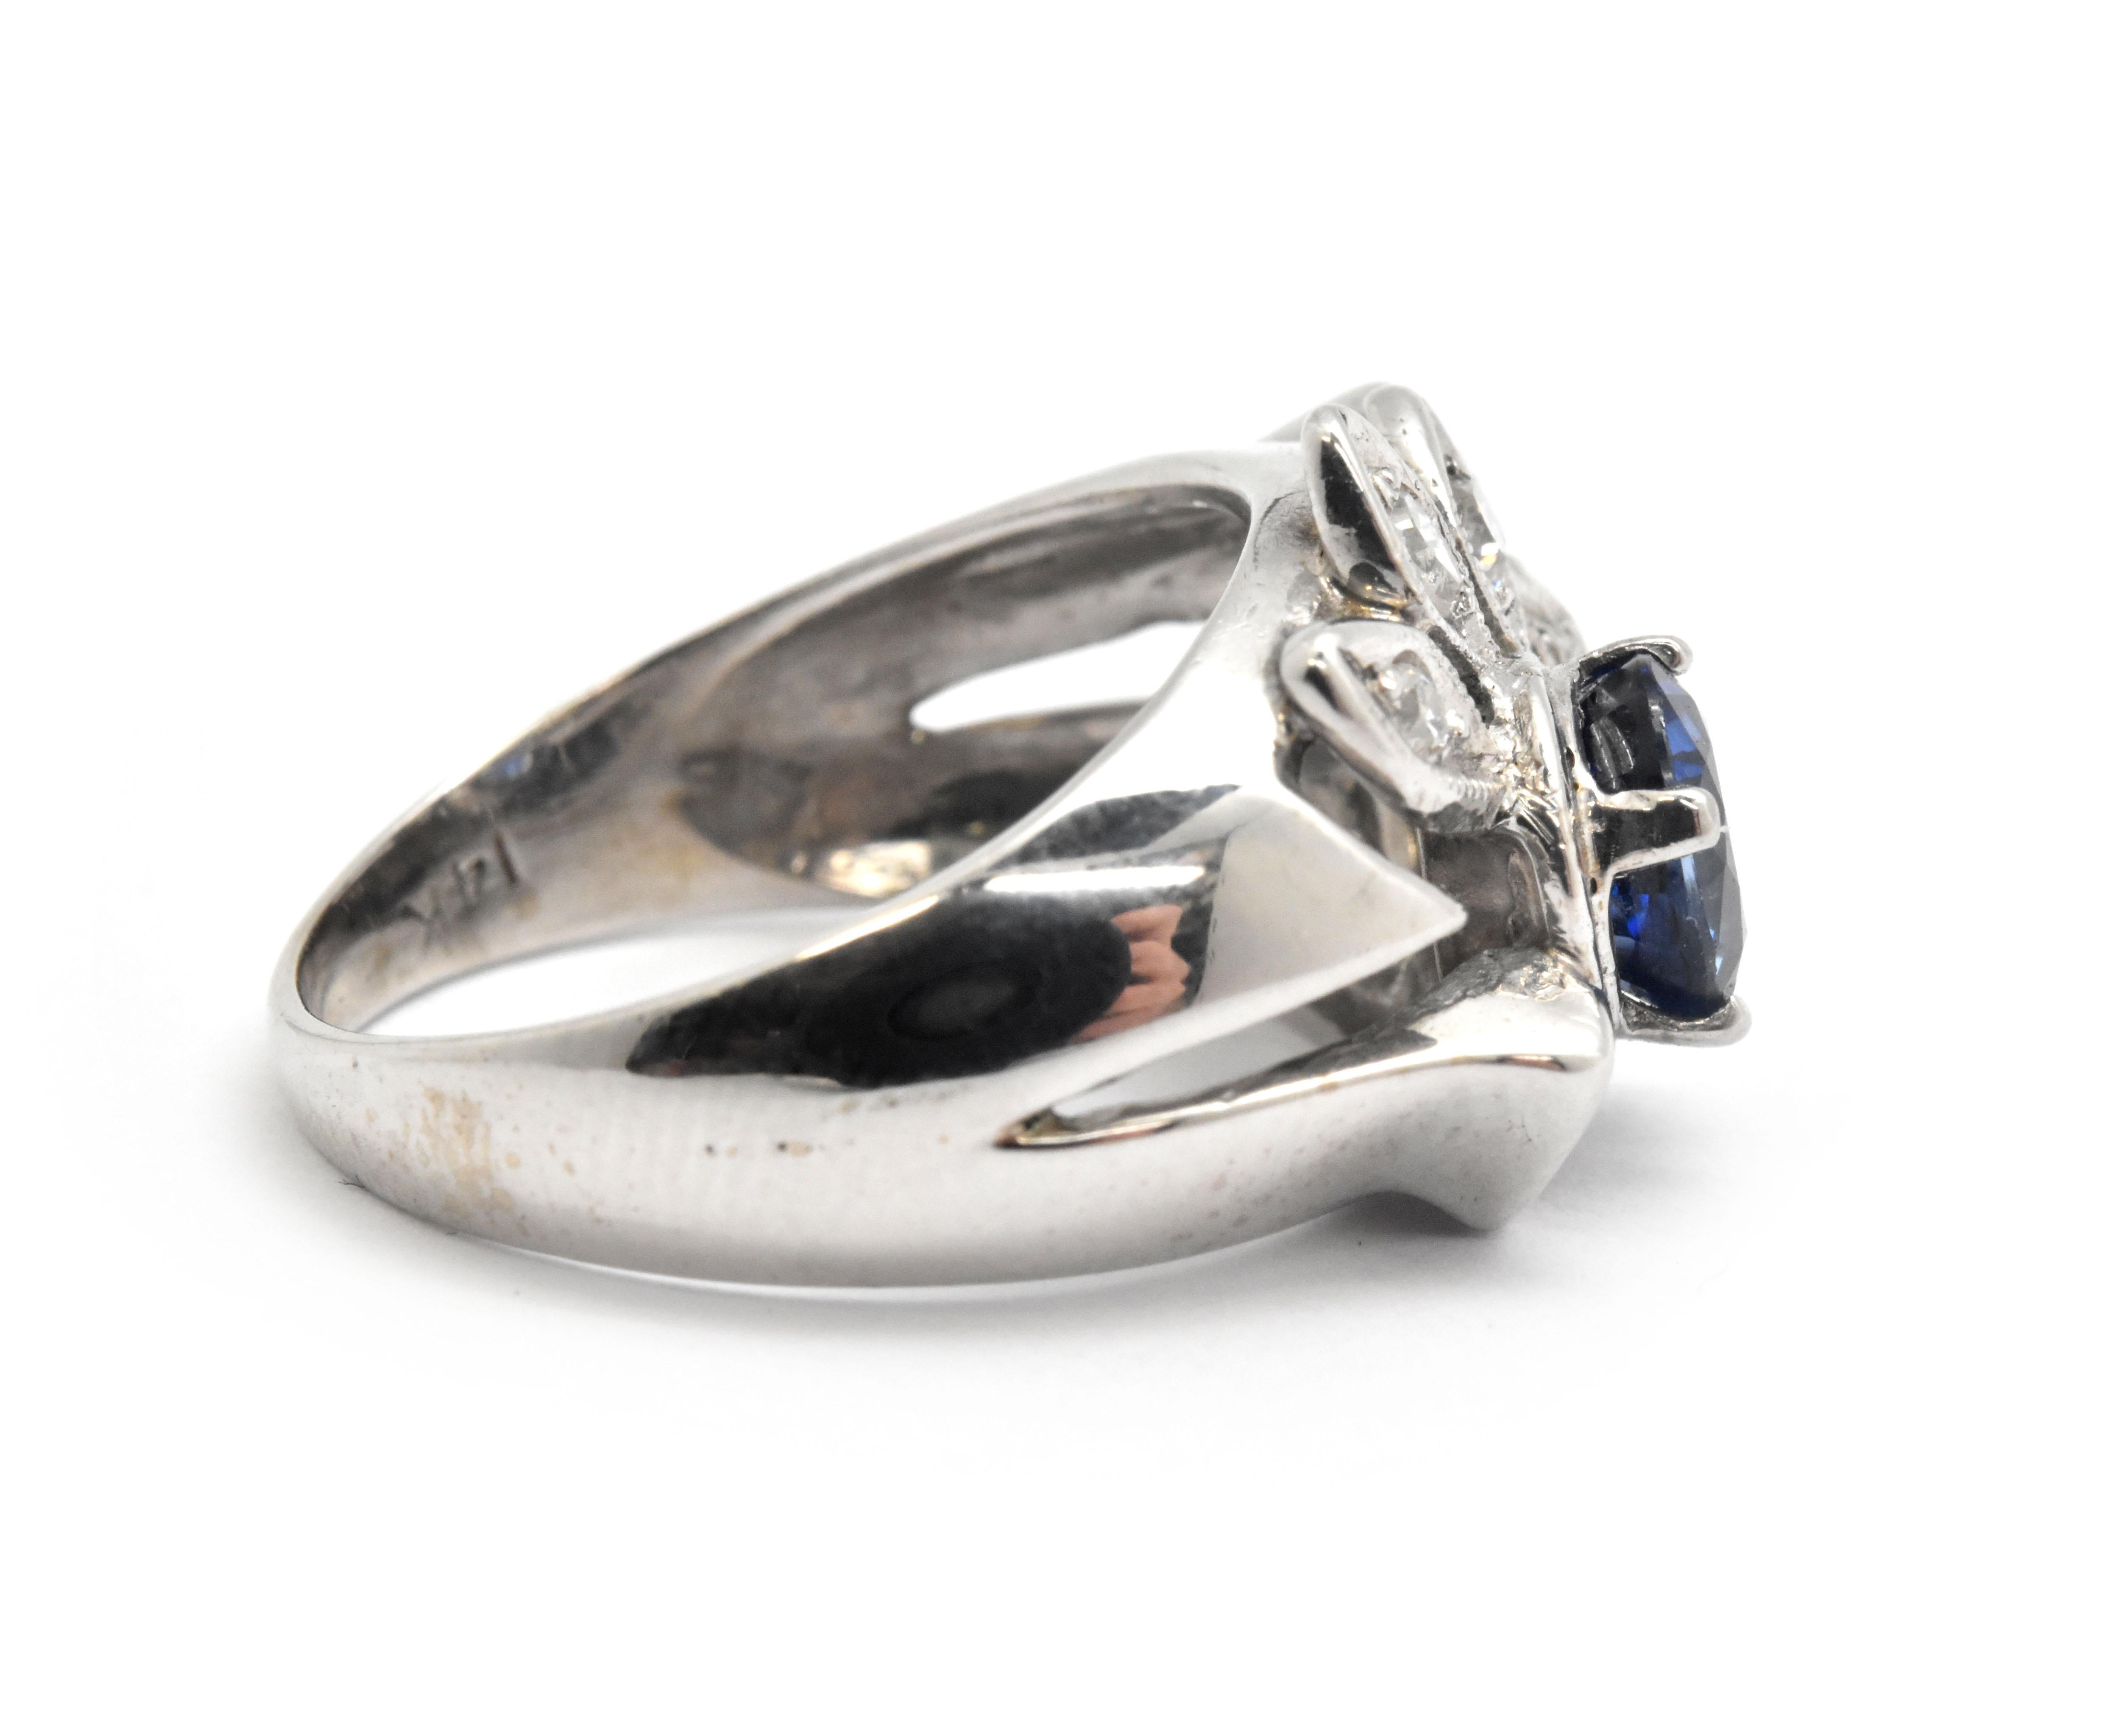 This fabulous cocktail ring features an oval shaped sapphire prong set into the top of the ring. Set around the lovely sapphire are 6 diamond accents equaling 0.15ctw. The sapphire is an exceptional deep blue color, oval cut and measures 6.8x5.6mm